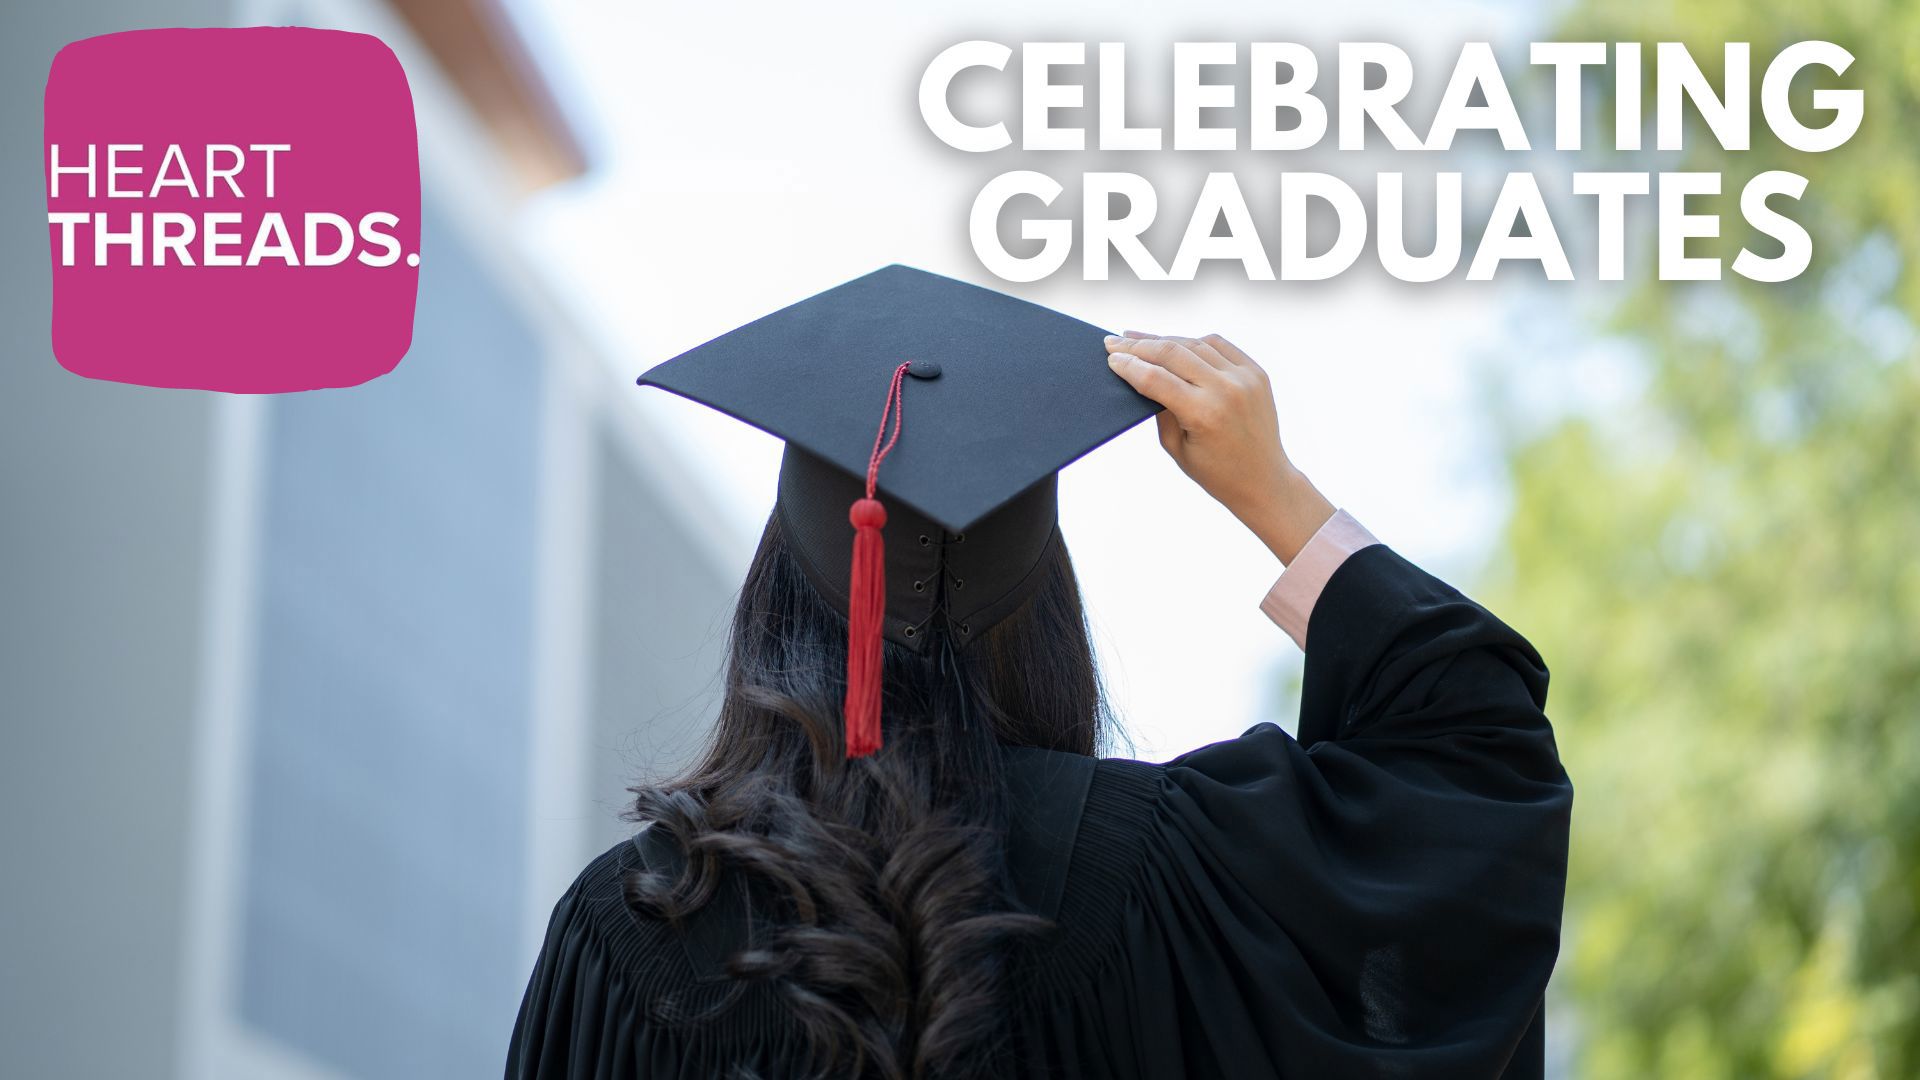 Graduation is an exciting time for those who are entering into the next phase of their lives. These stories celebrate the graduates and their accomplishments!